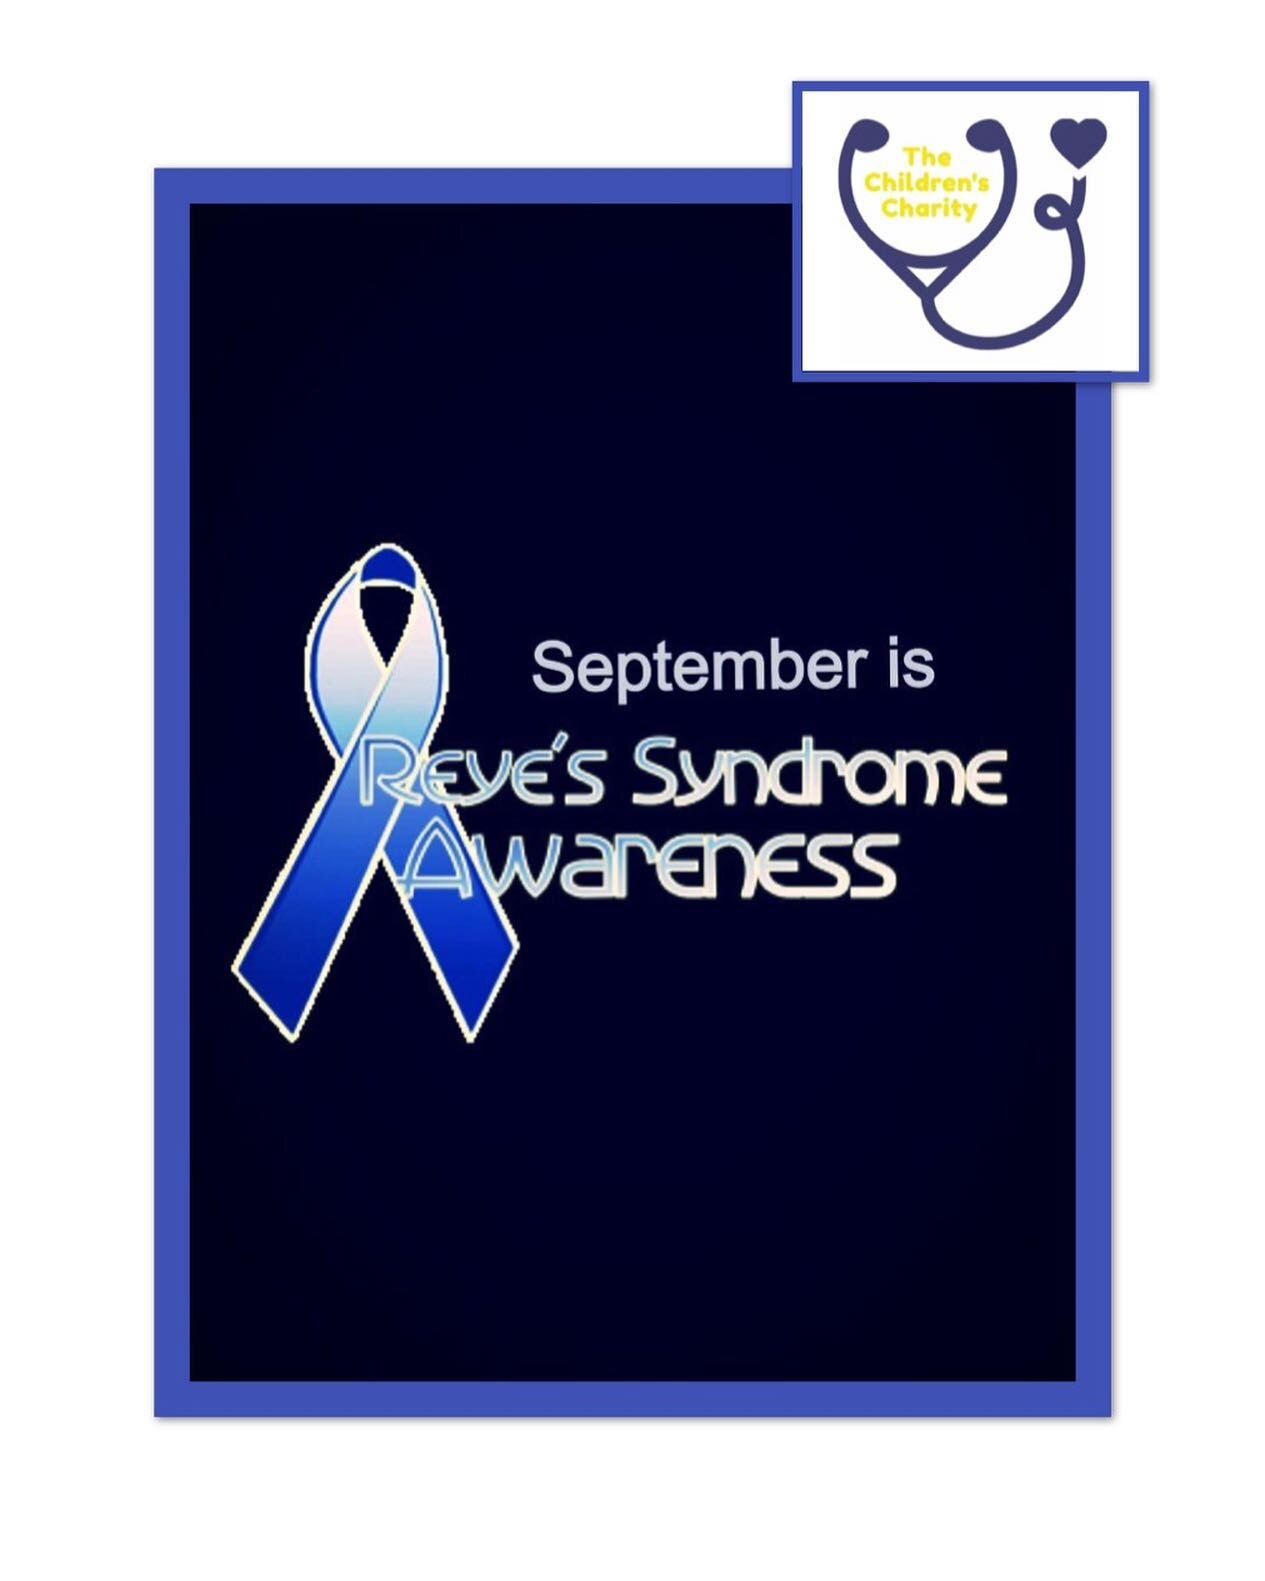 September is Reye&rsquo;s Syndromes Awareness month!! Reye&rsquo;s Syndrome is a disease that mostly affects kids from ages 4-12 years old. It is a rare but very serious condition that causes confusion, brain swelling, and liver damage. Reye&rsquo;s 